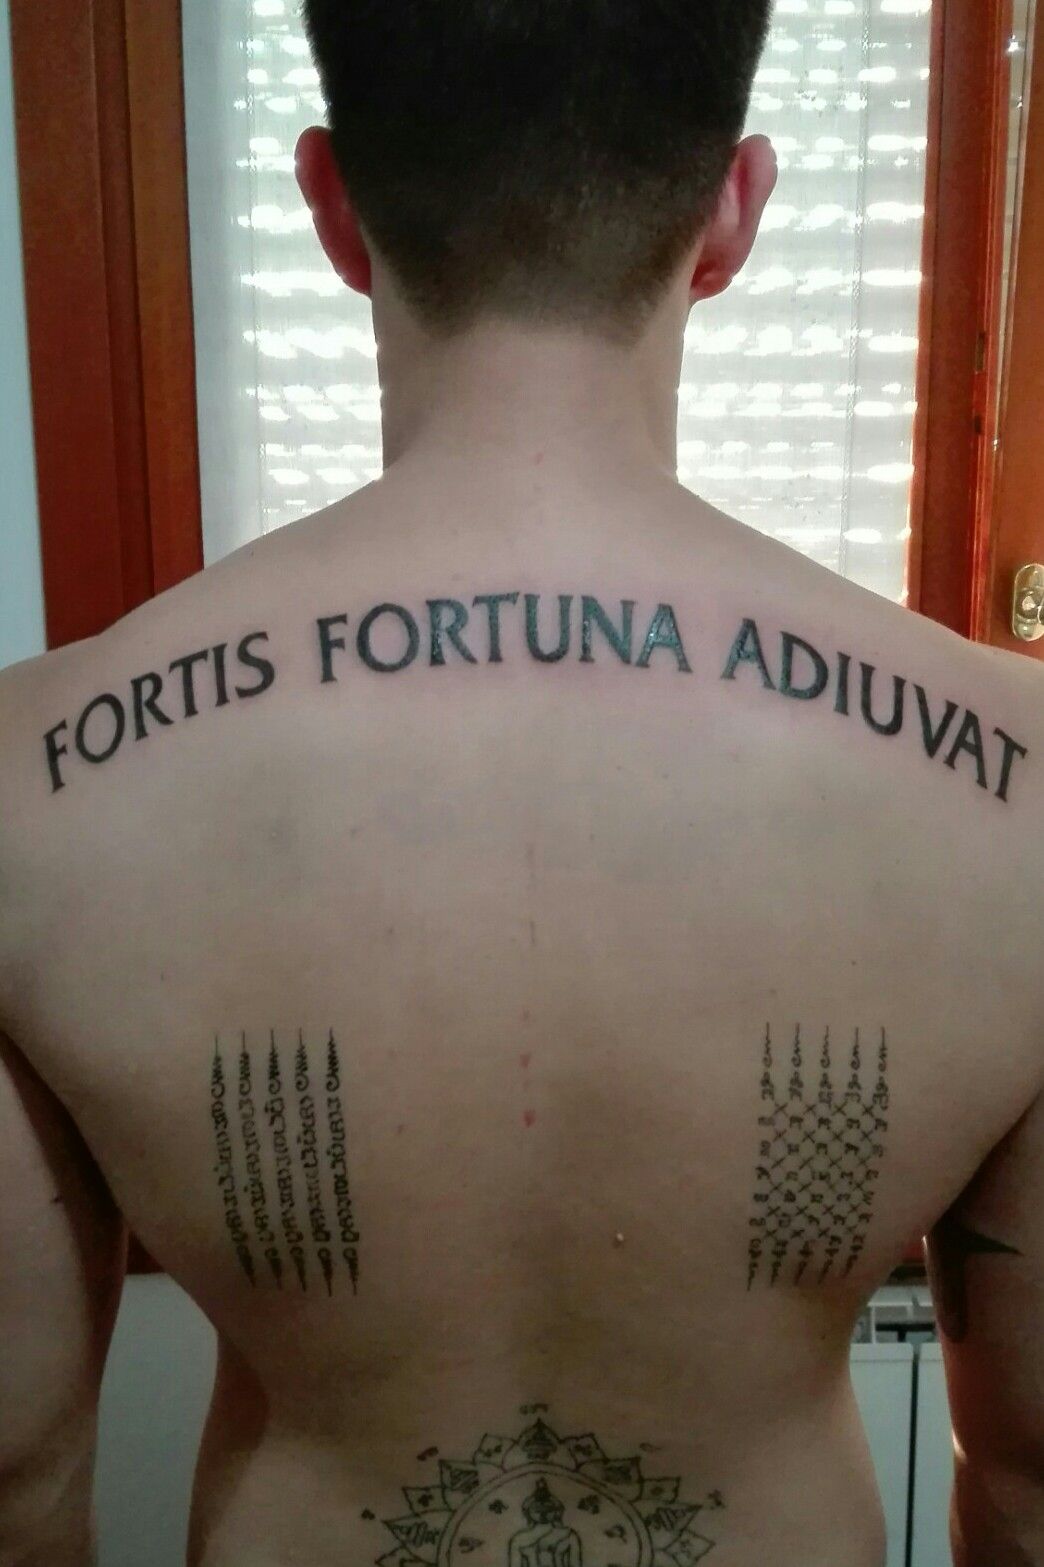 Small Tattoos on Twitter Latin phrase Fortis Fortuna Adiuvat tattoo  which literally translates to Fortune Favors httpstcoTi1watMGKA  httpstcoM8ZfYj1rXj  Twitter